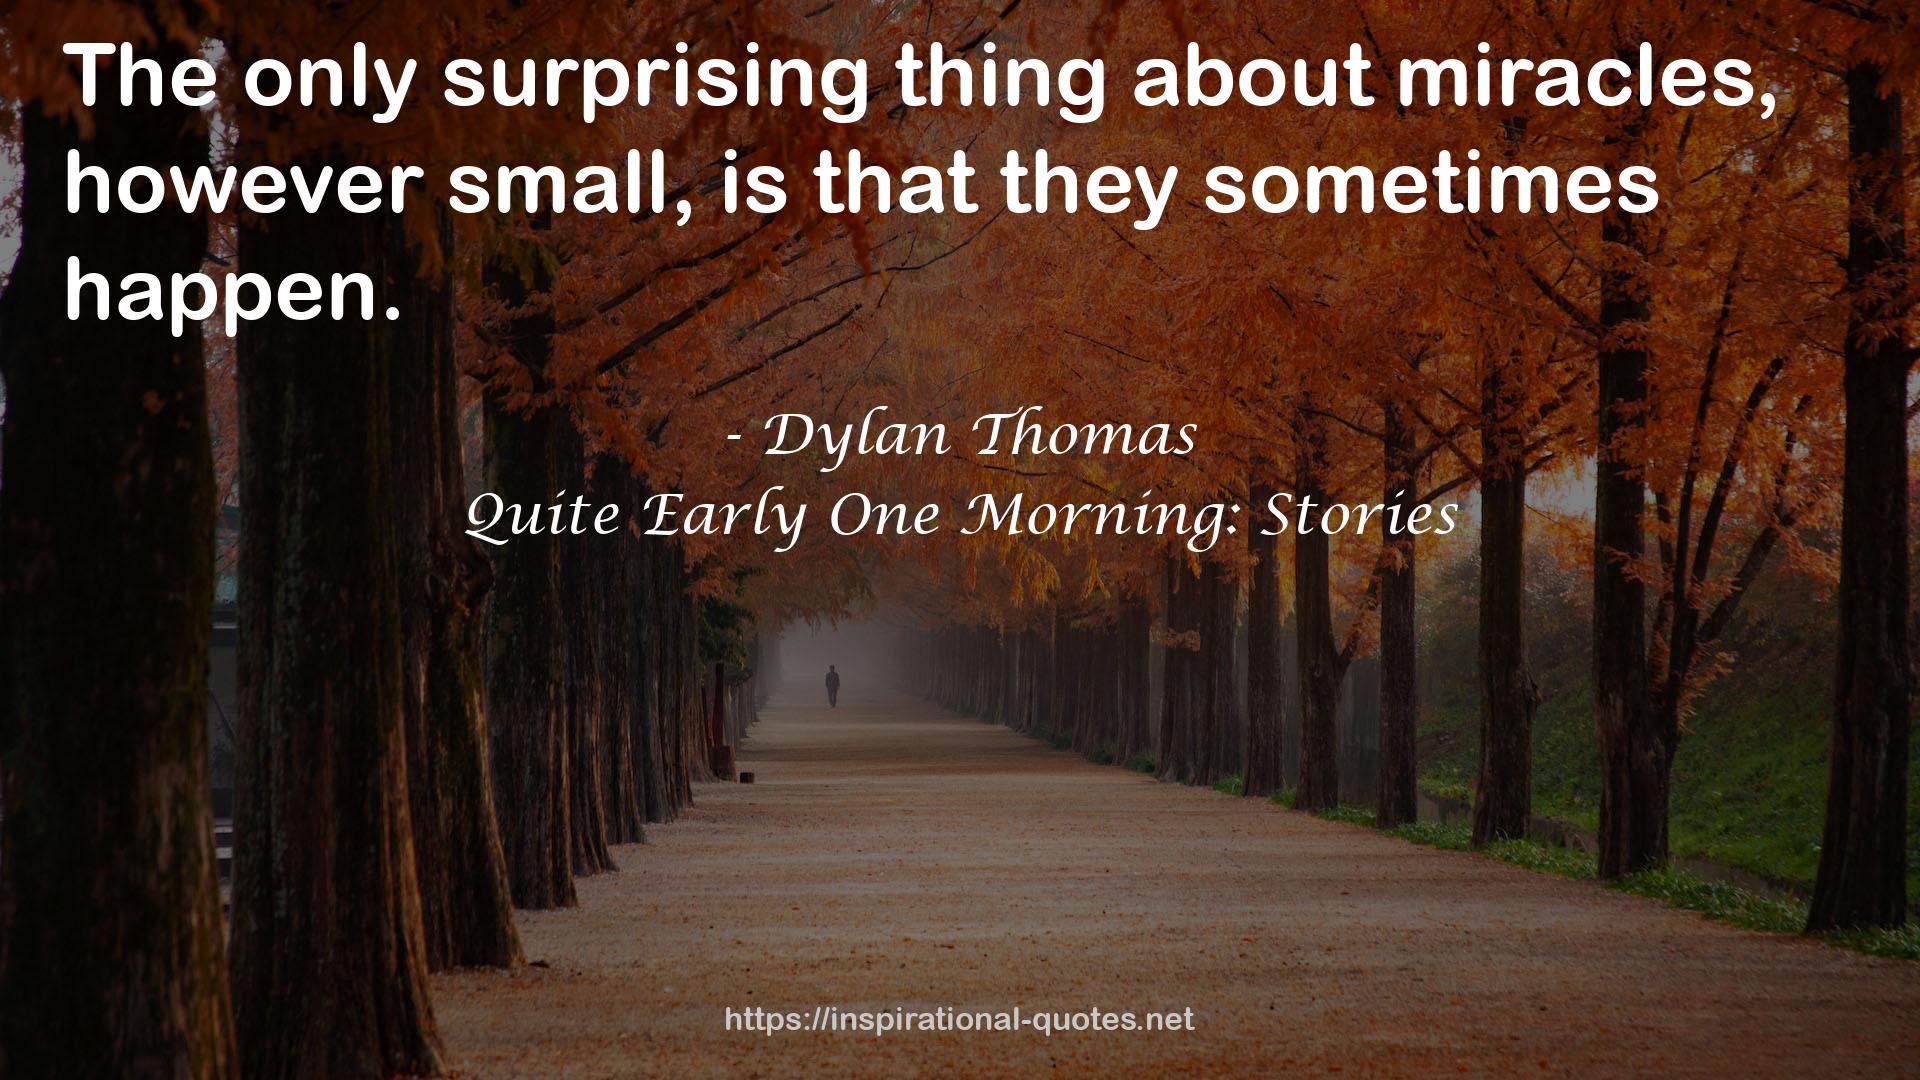 Quite Early One Morning: Stories QUOTES